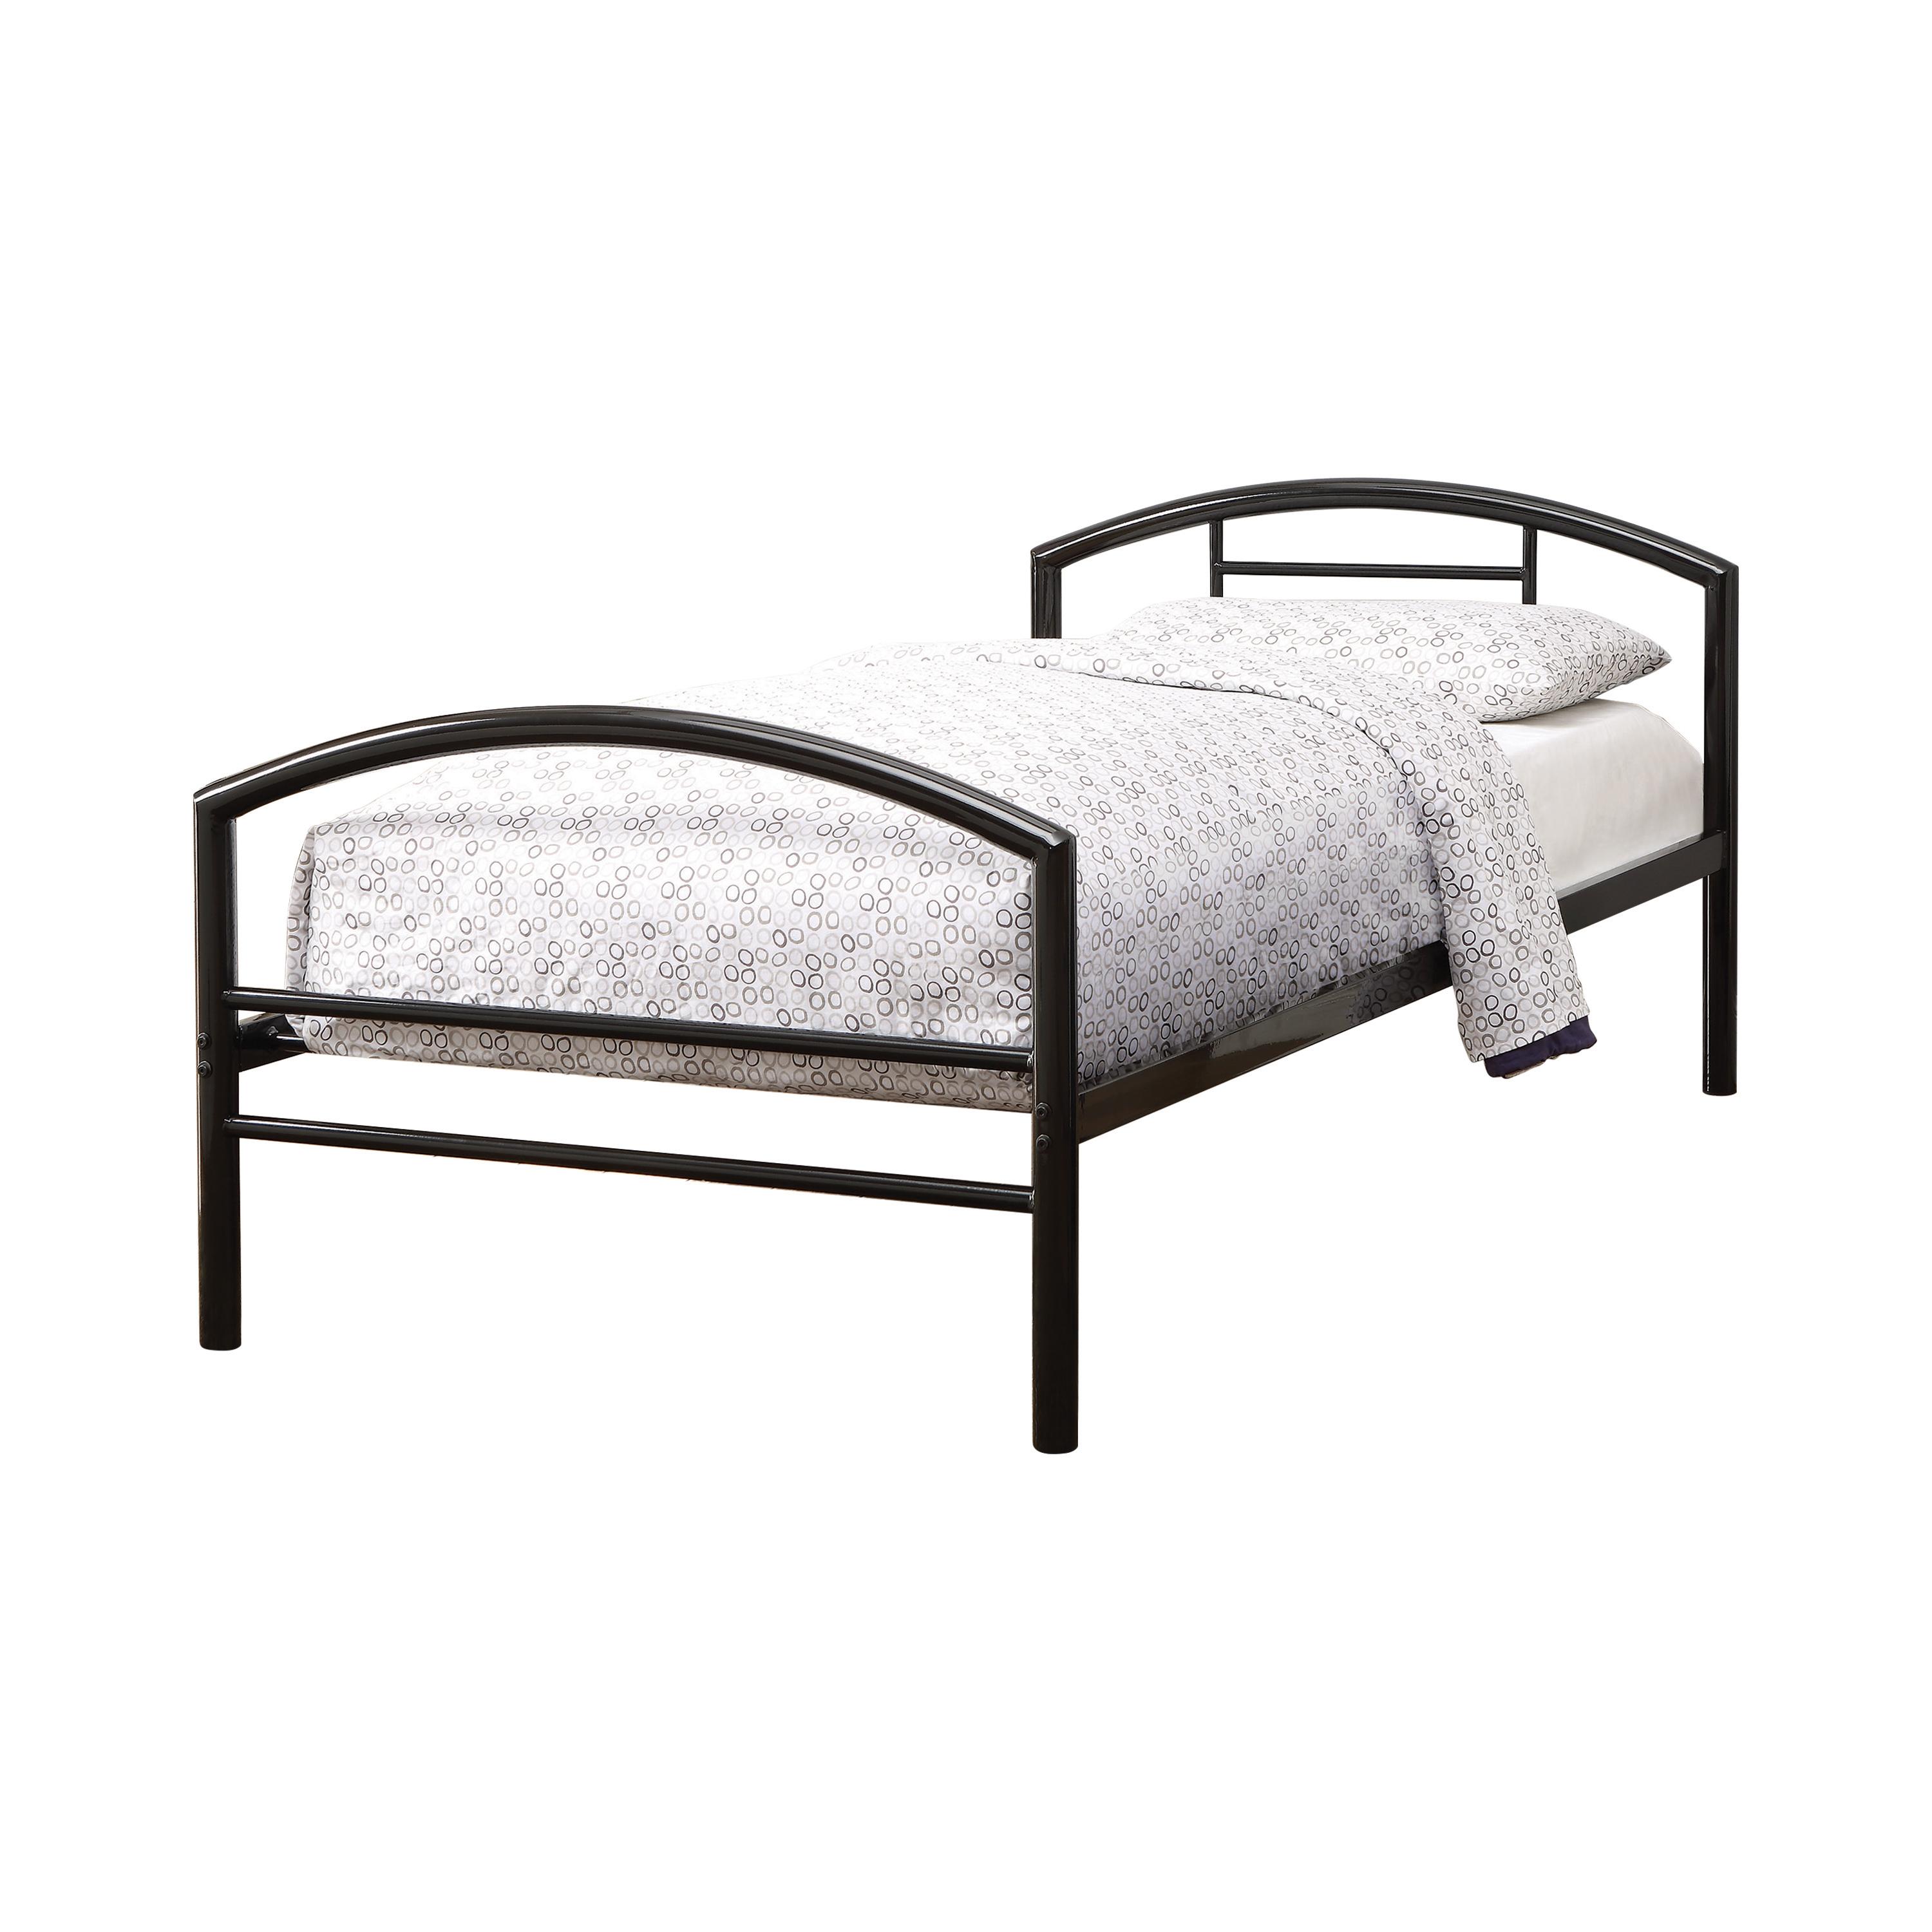 Contemporary Bed 400157T Baines 400157T in Black 